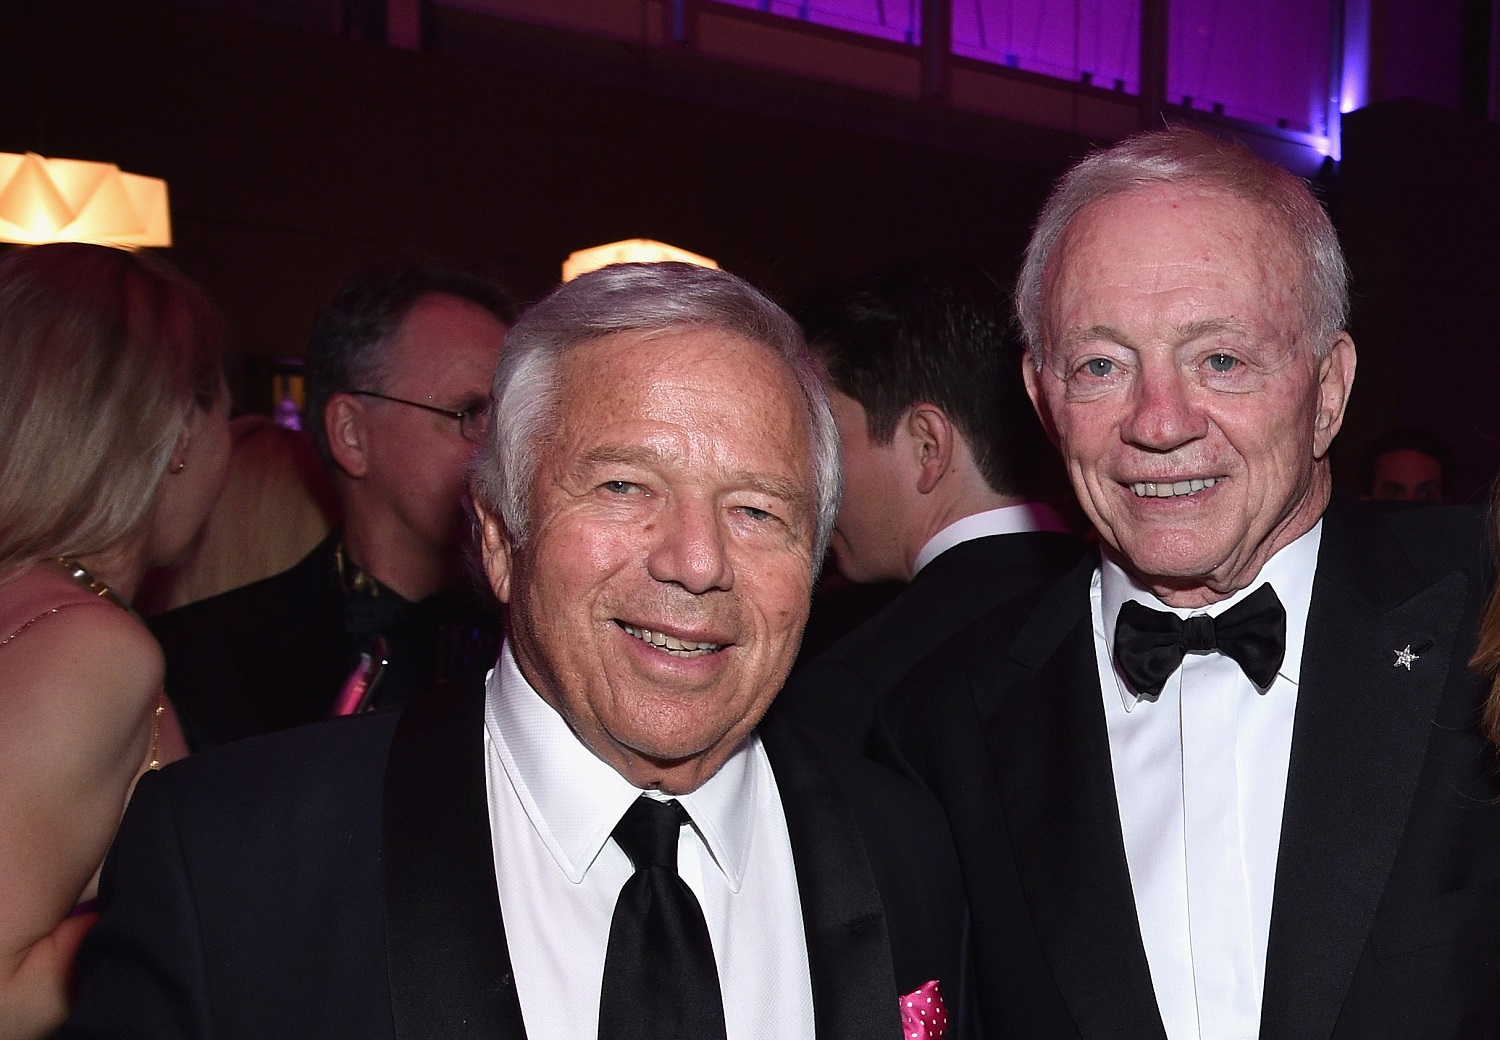 Robert Kraft and Jerry Jones, owners of the New England Patriots and Dallas Cowboys, respectively, attend the 2017 Vanity Fair Oscar Party hosted by Graydon Carter in Beverly Hills, California.